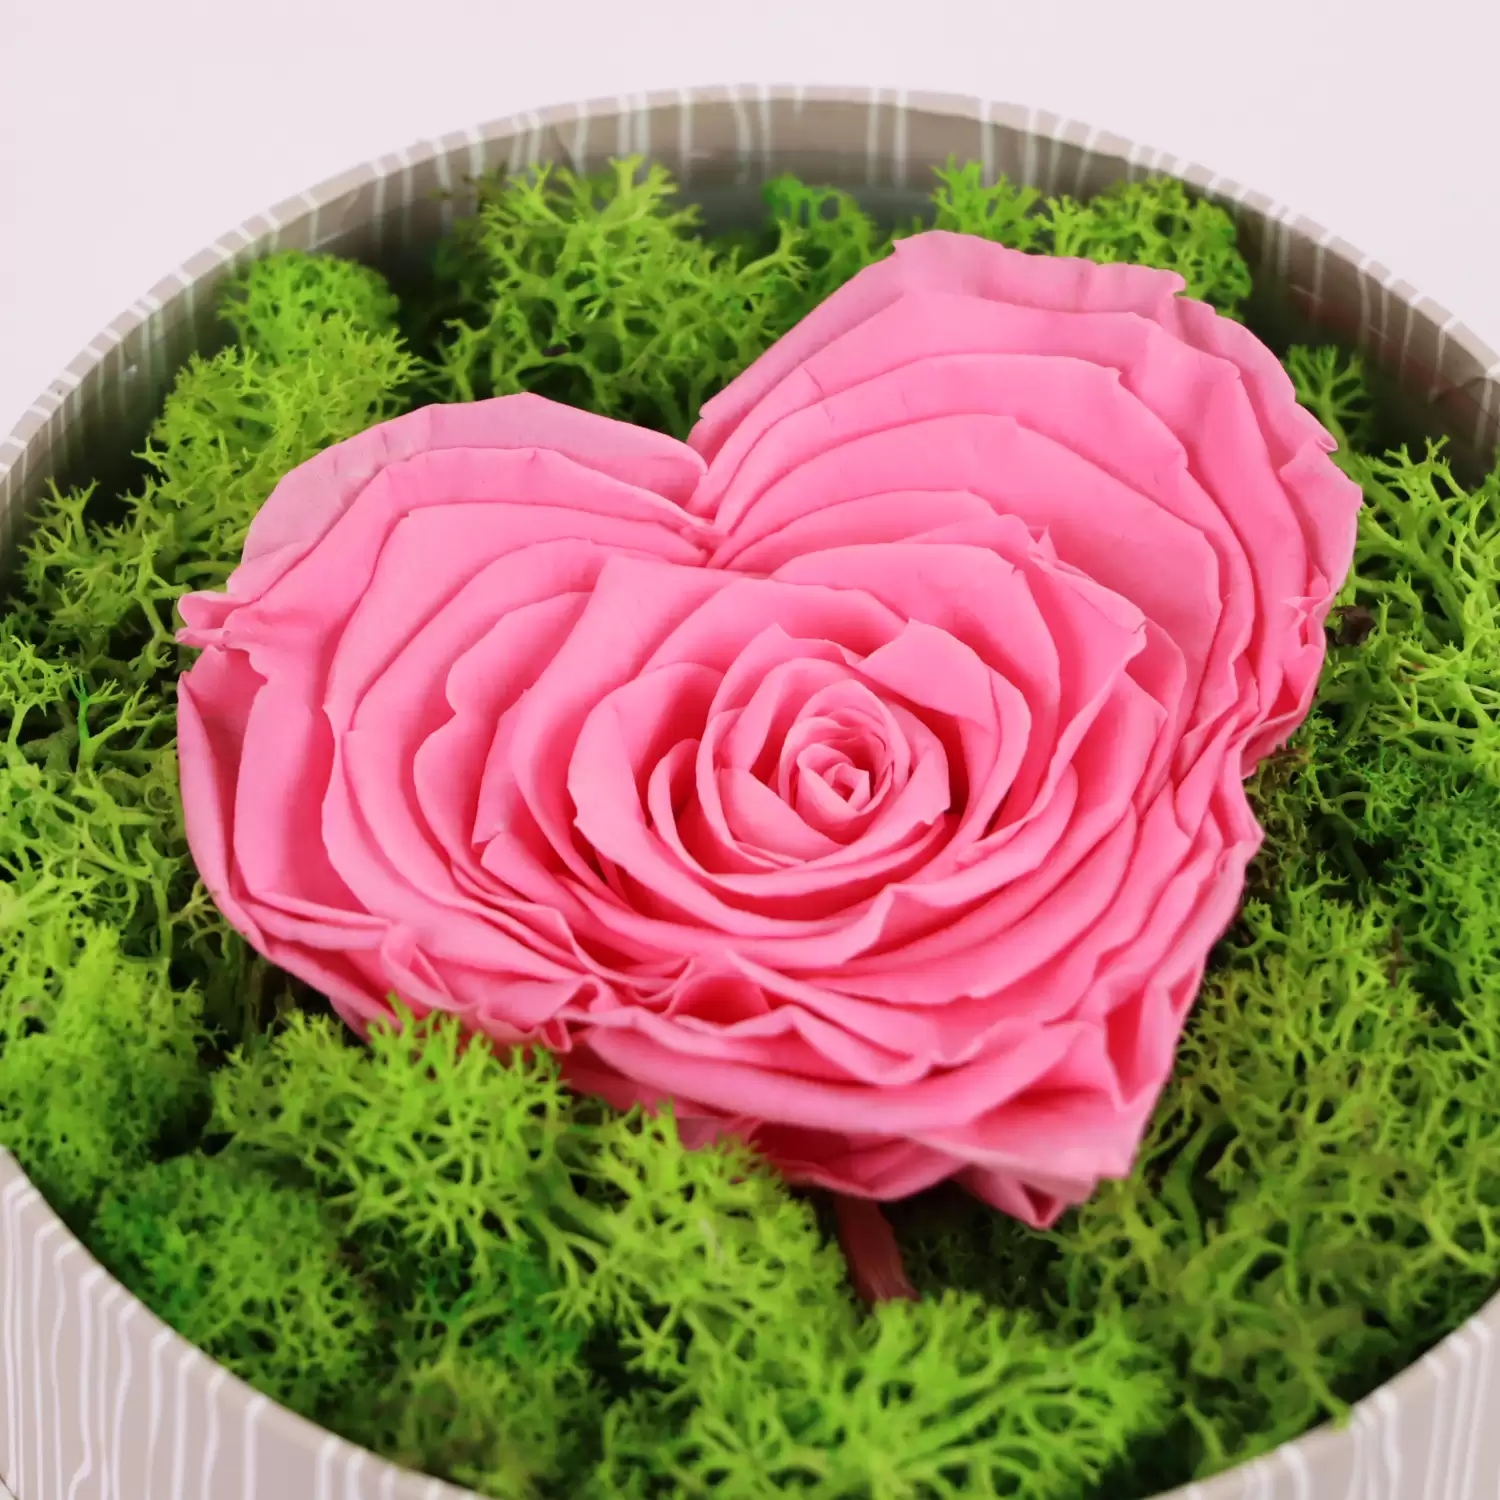 Heart Shaped Infinity Rose | Gifts For Her | Send Gifts To Bahrain - Flora D'lite